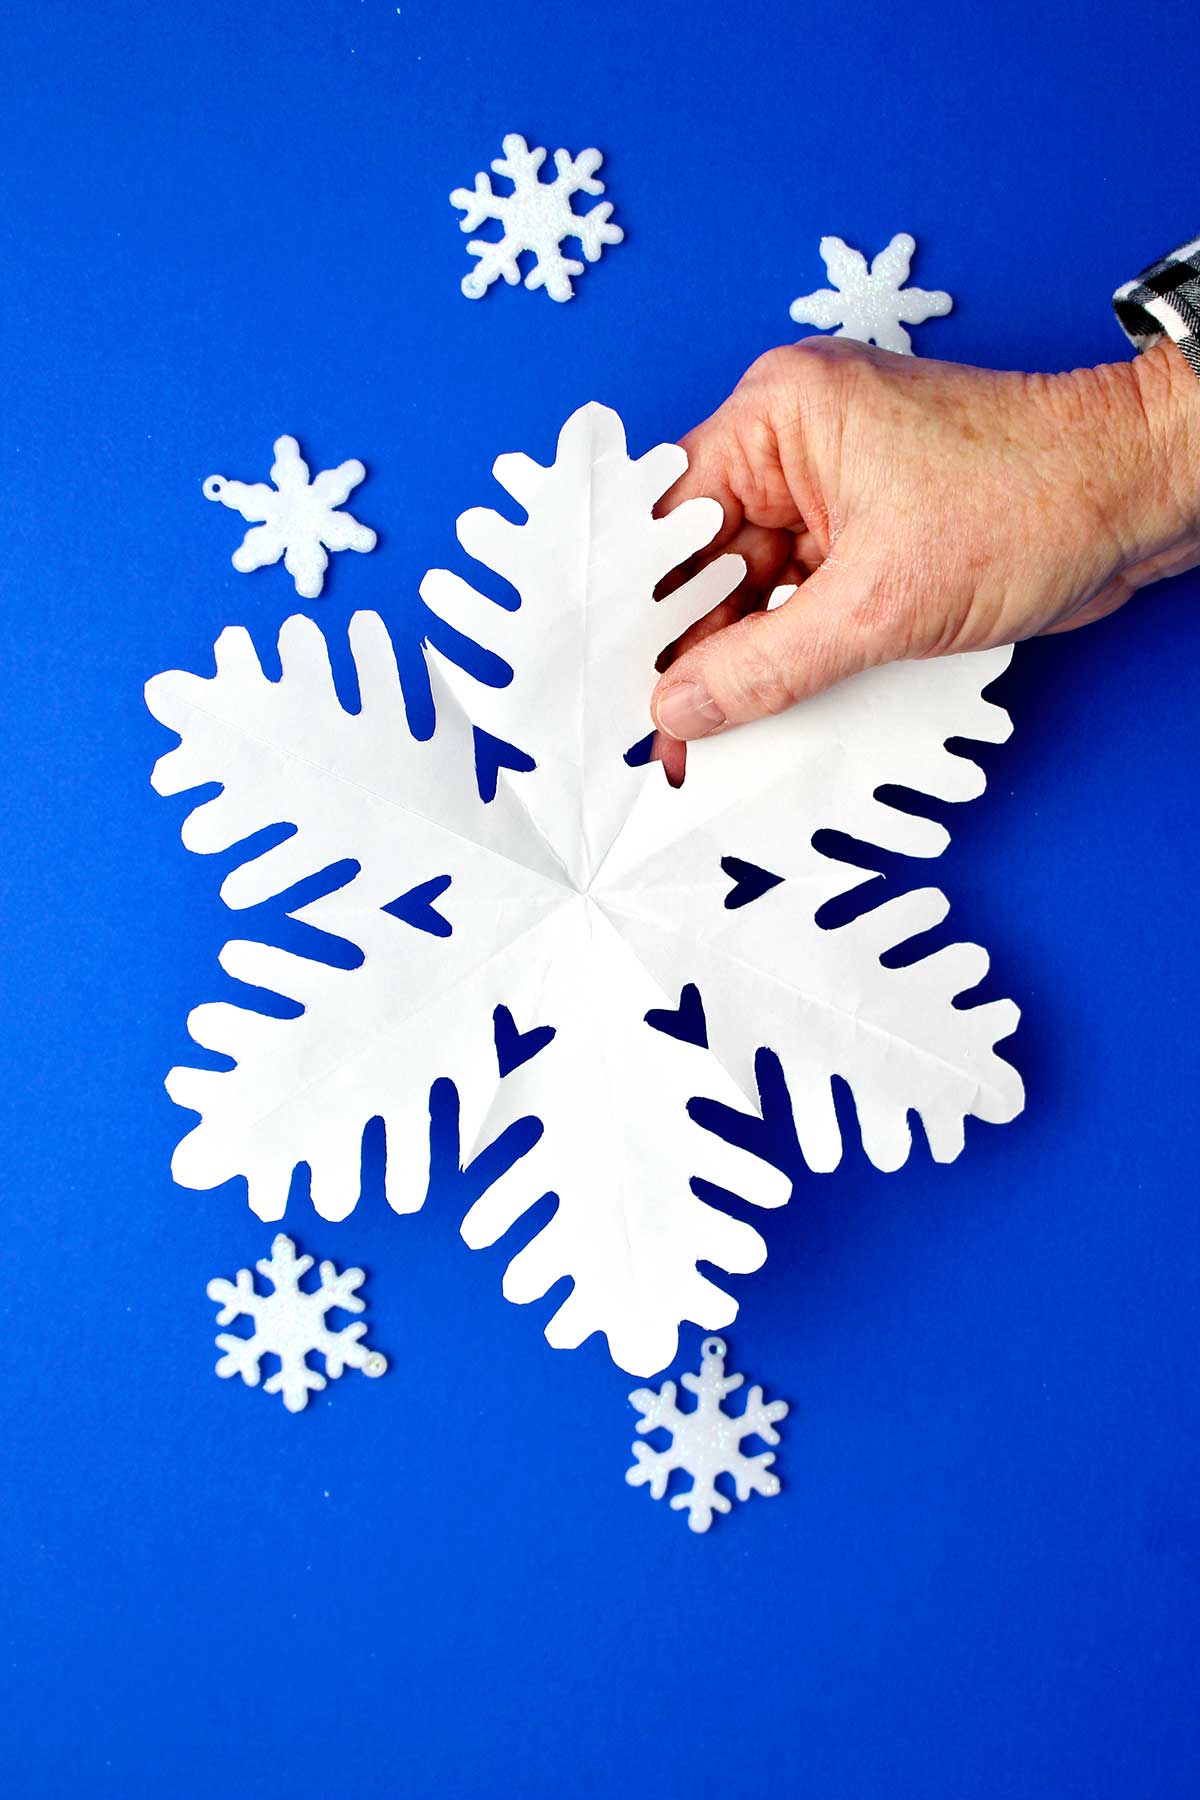 Hand holding fully unfolded snowflake made from white paper.